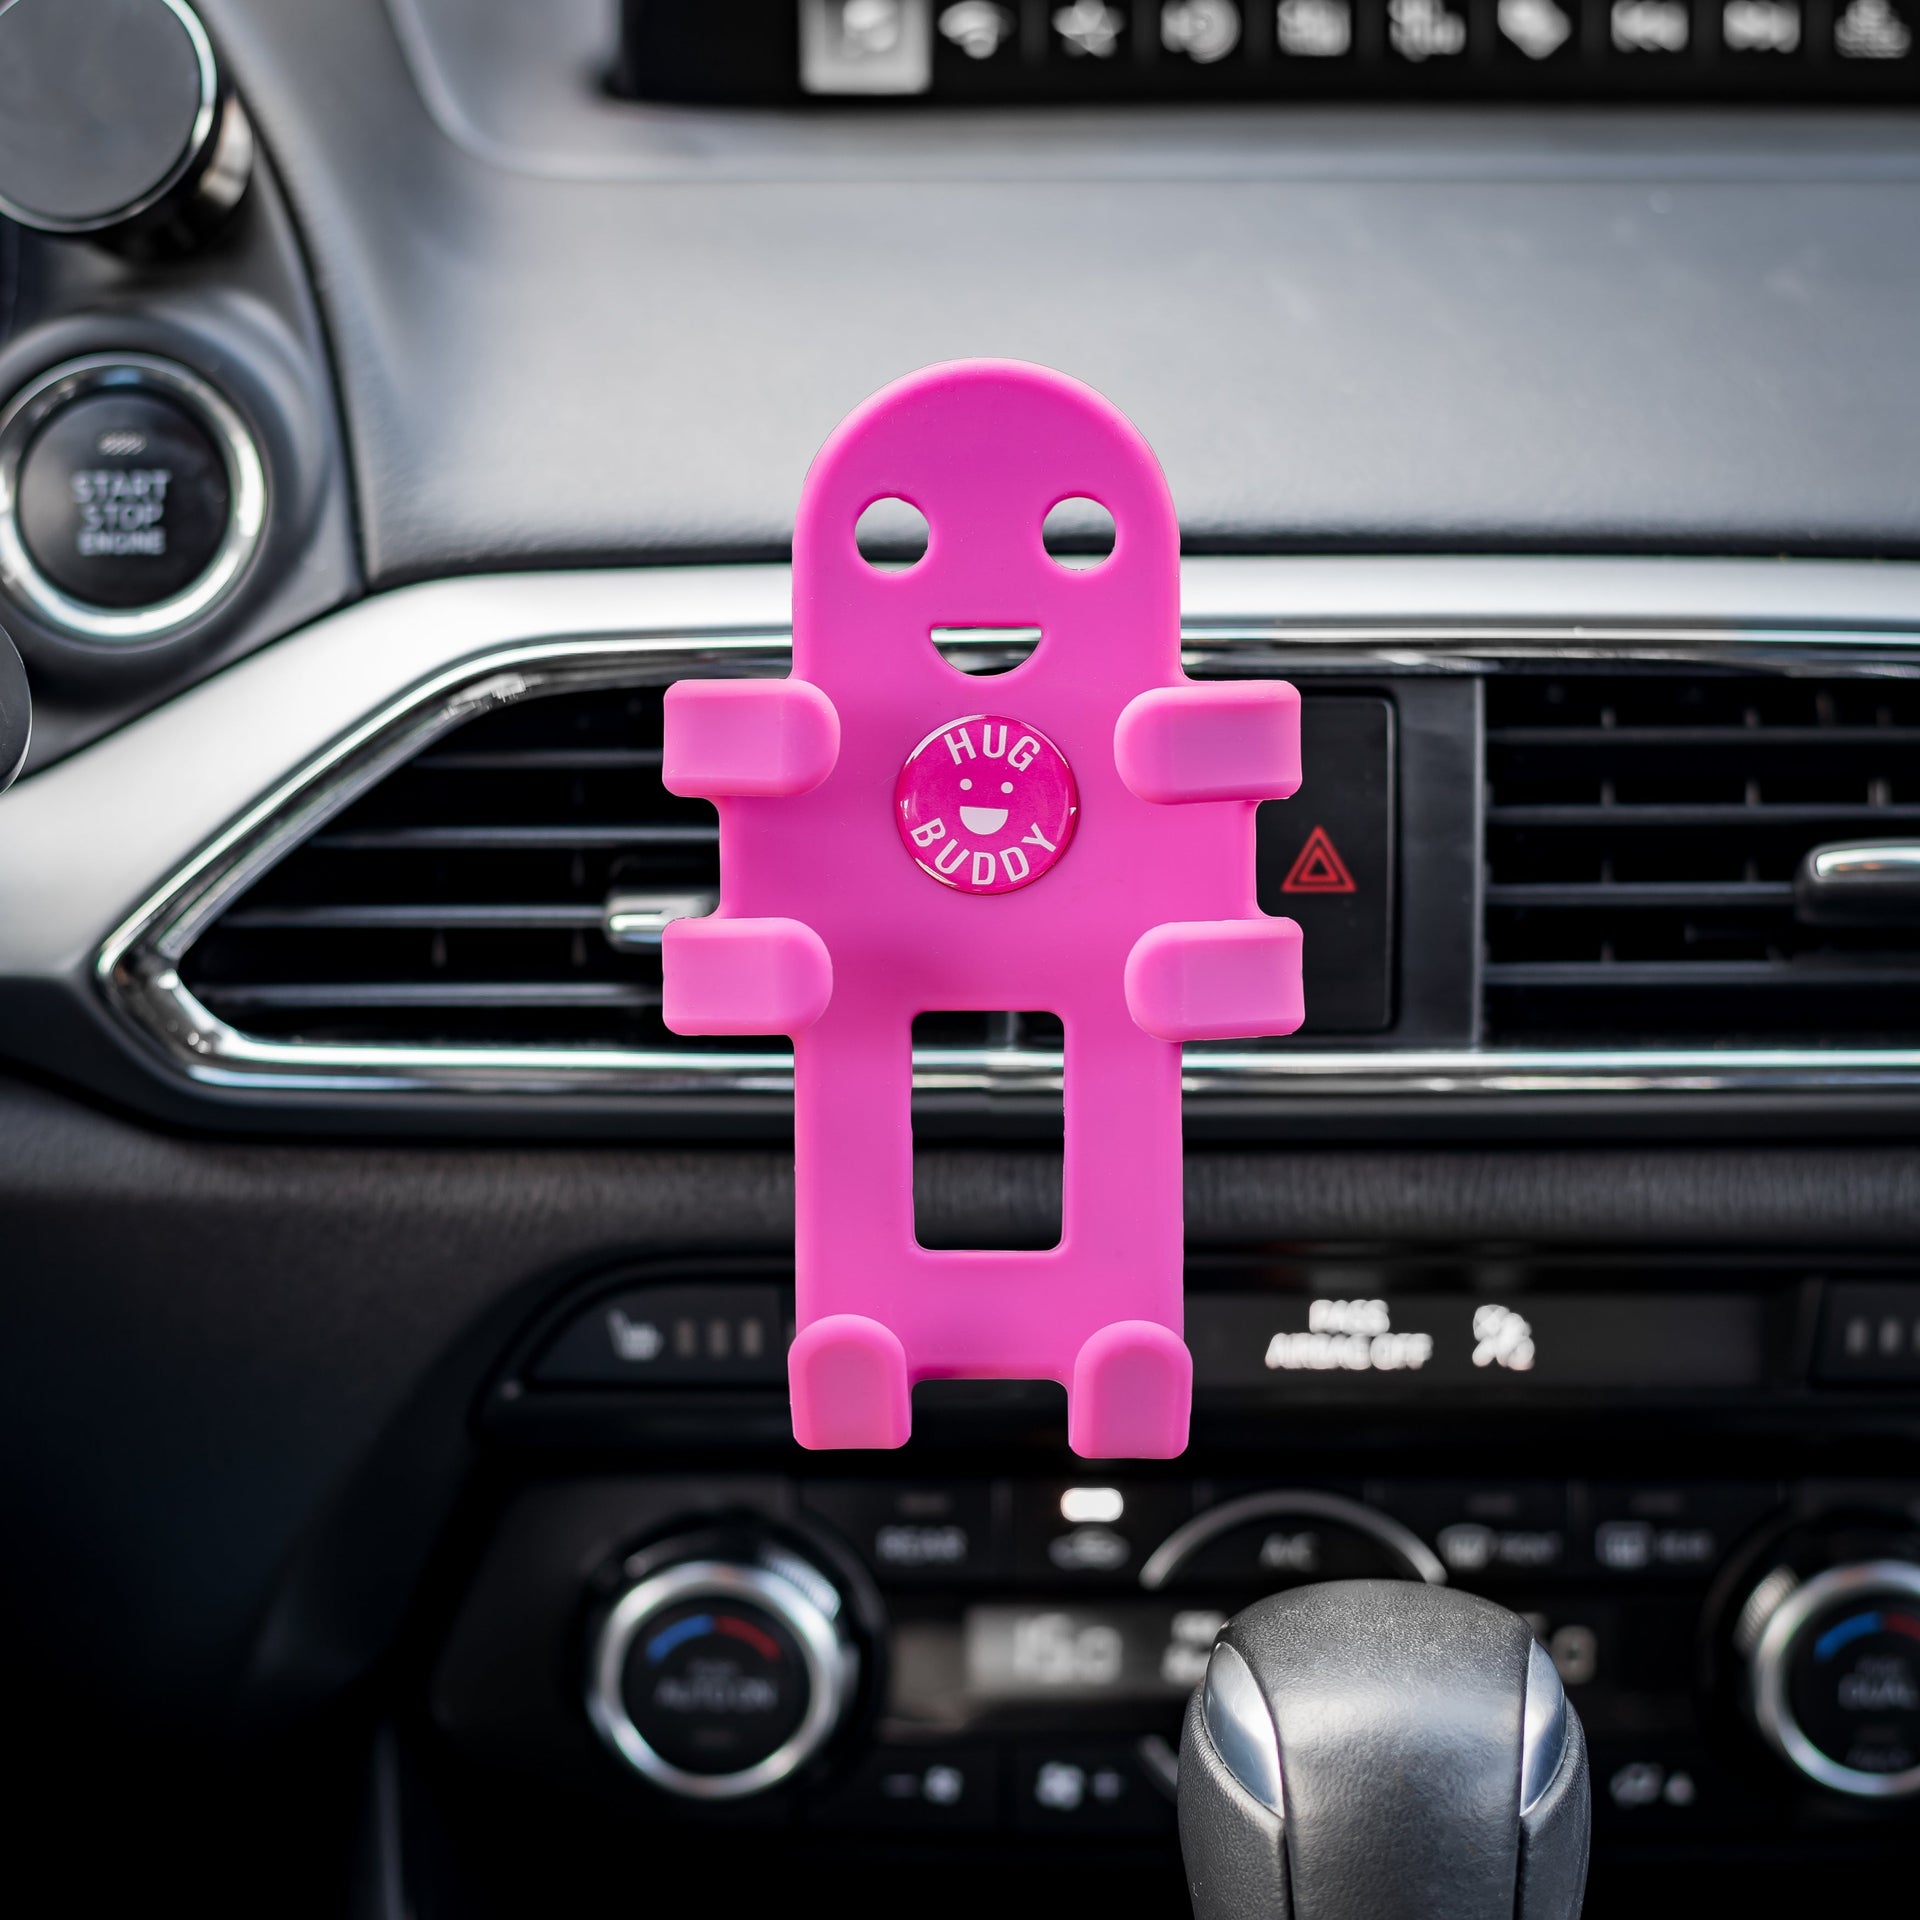 Image of OG Pink Hug Buddy with arms and legs in the closed position, ready to hold a cell phone on your next journey, while attached to a vehicle air vent